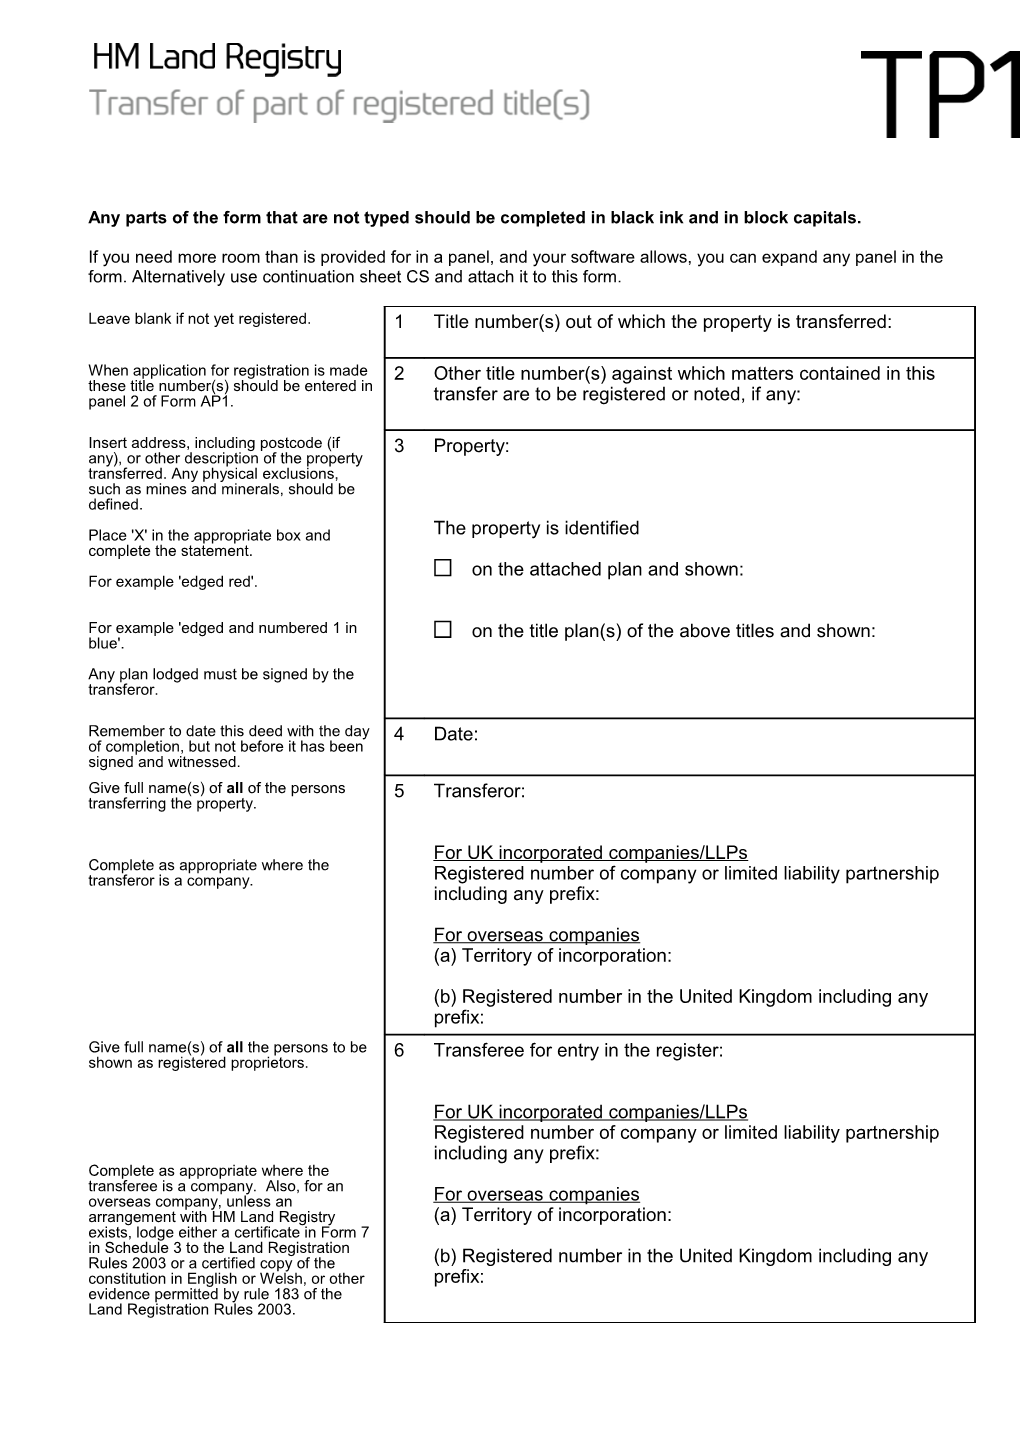 Any Parts of the Form That Are Not Typed Should Be Completed in Black Ink and in Block